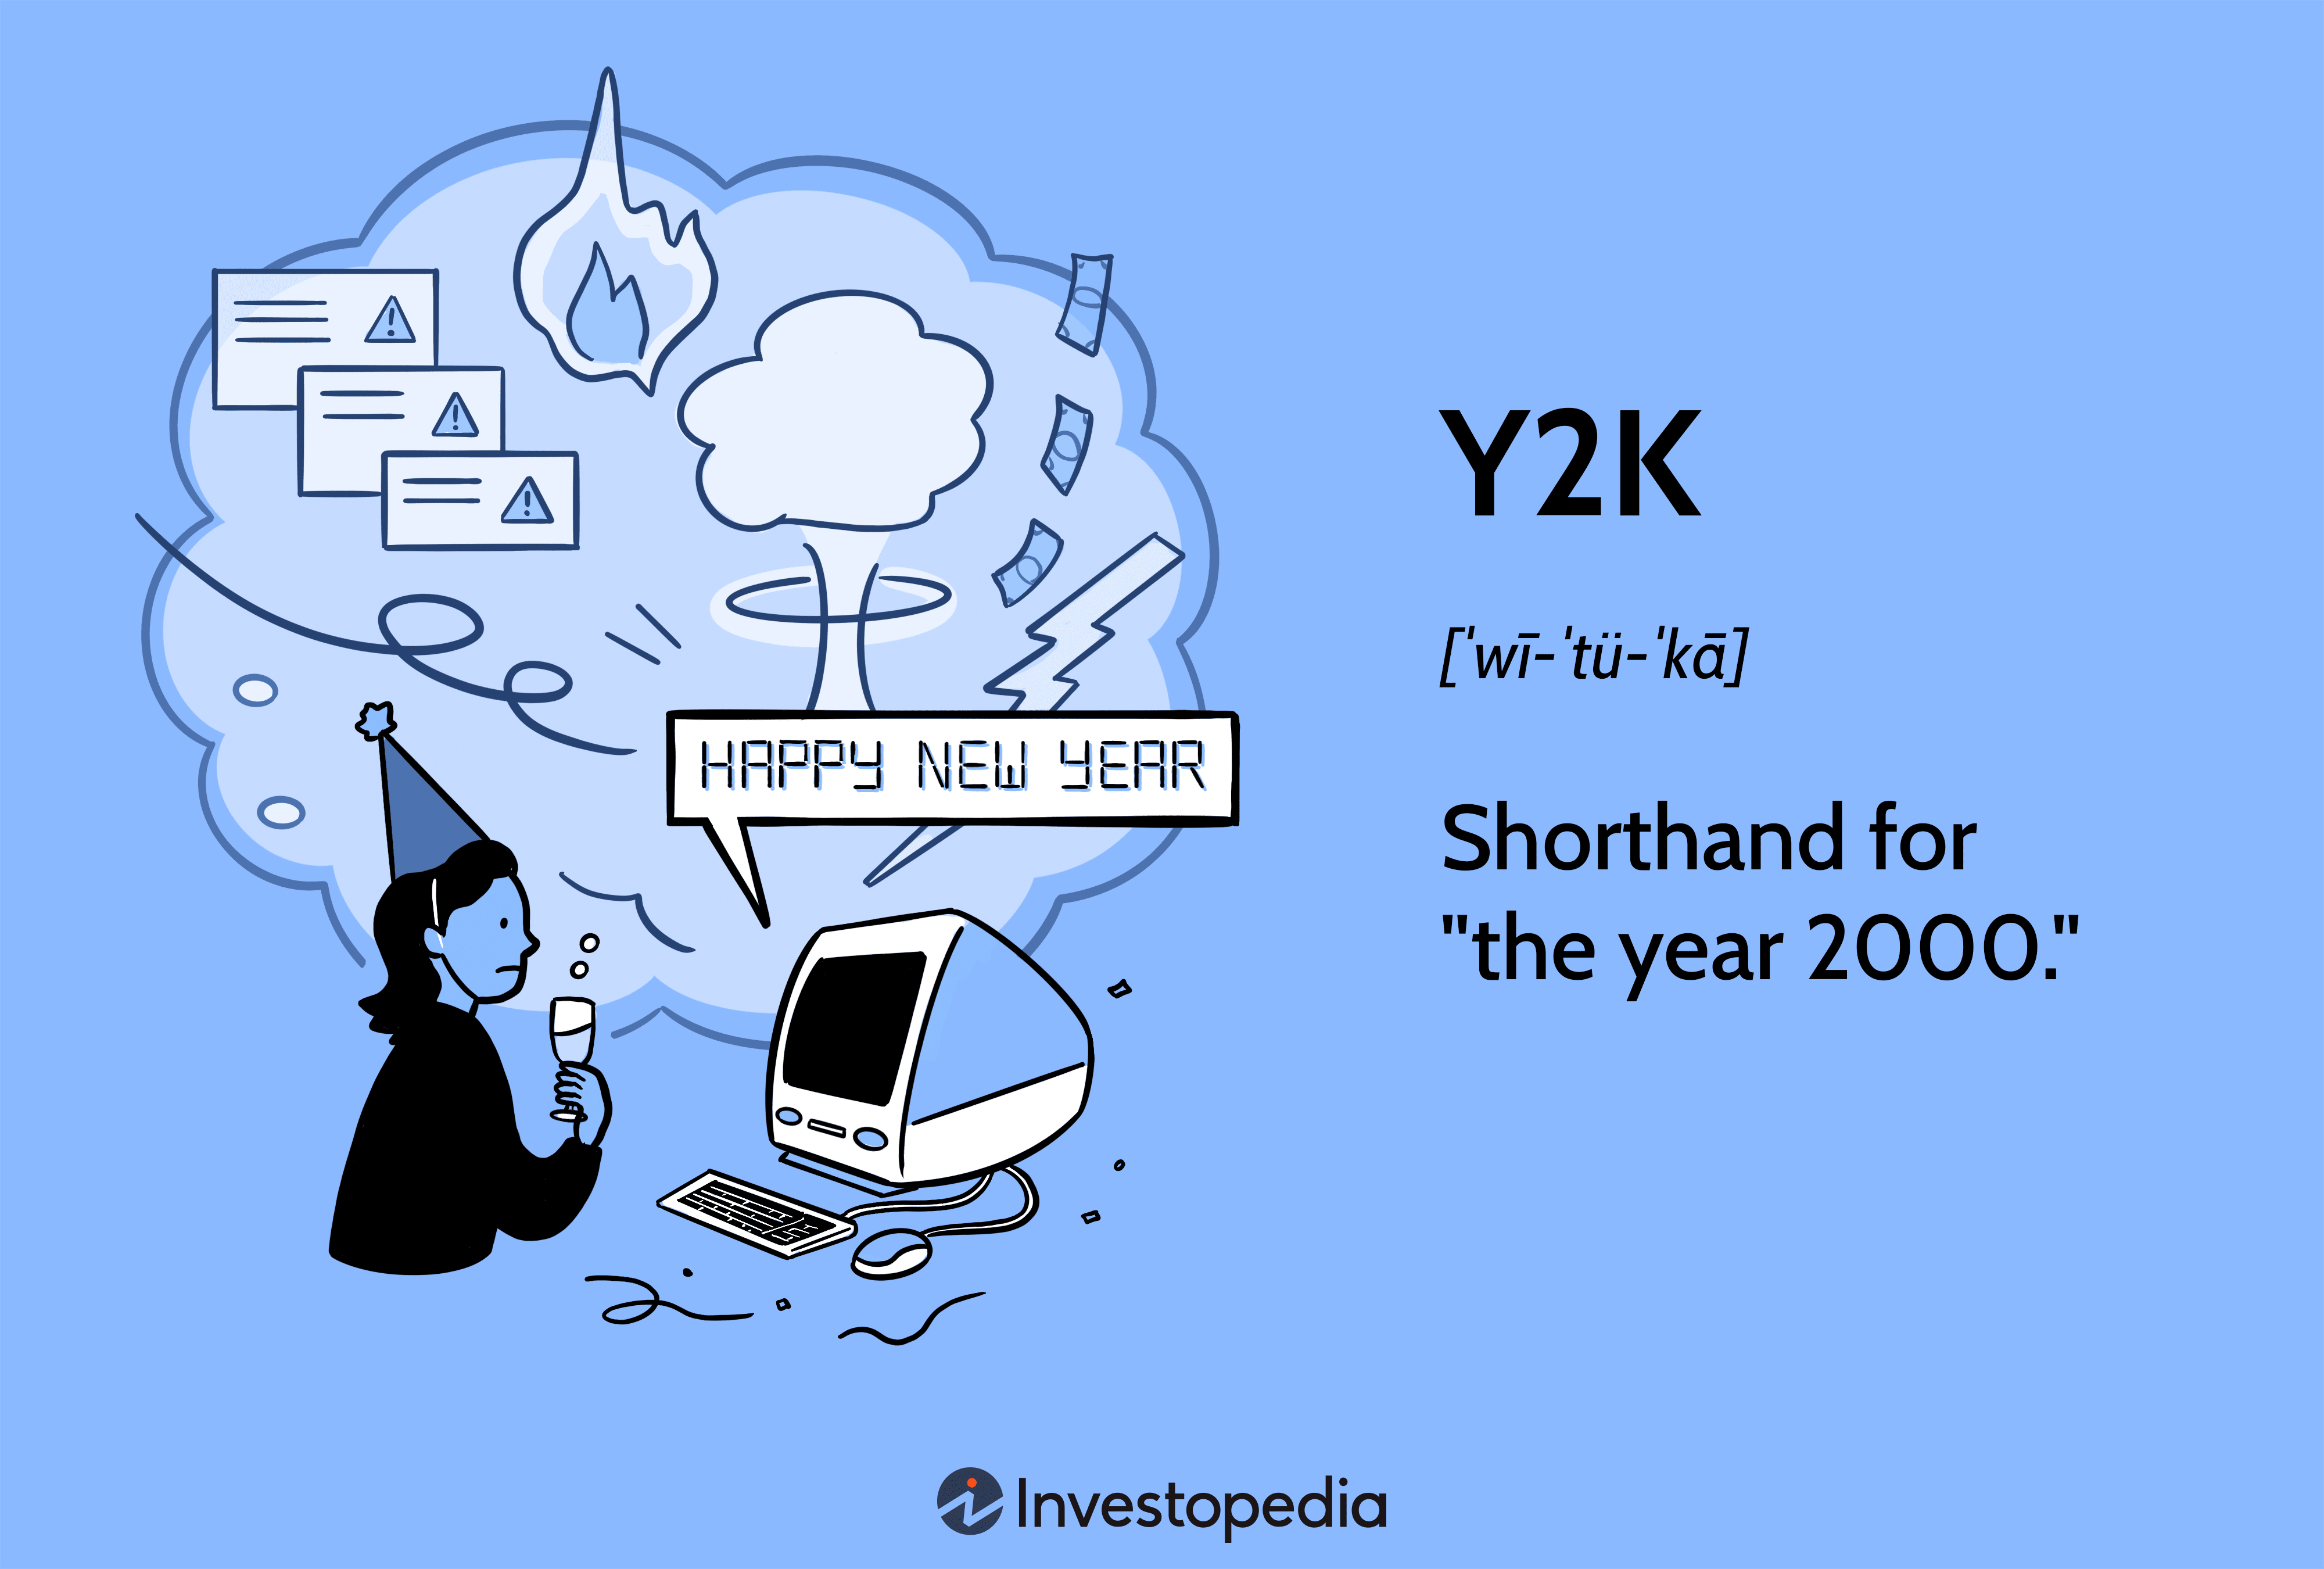 Y2K: Shorthand for "the year 2000."